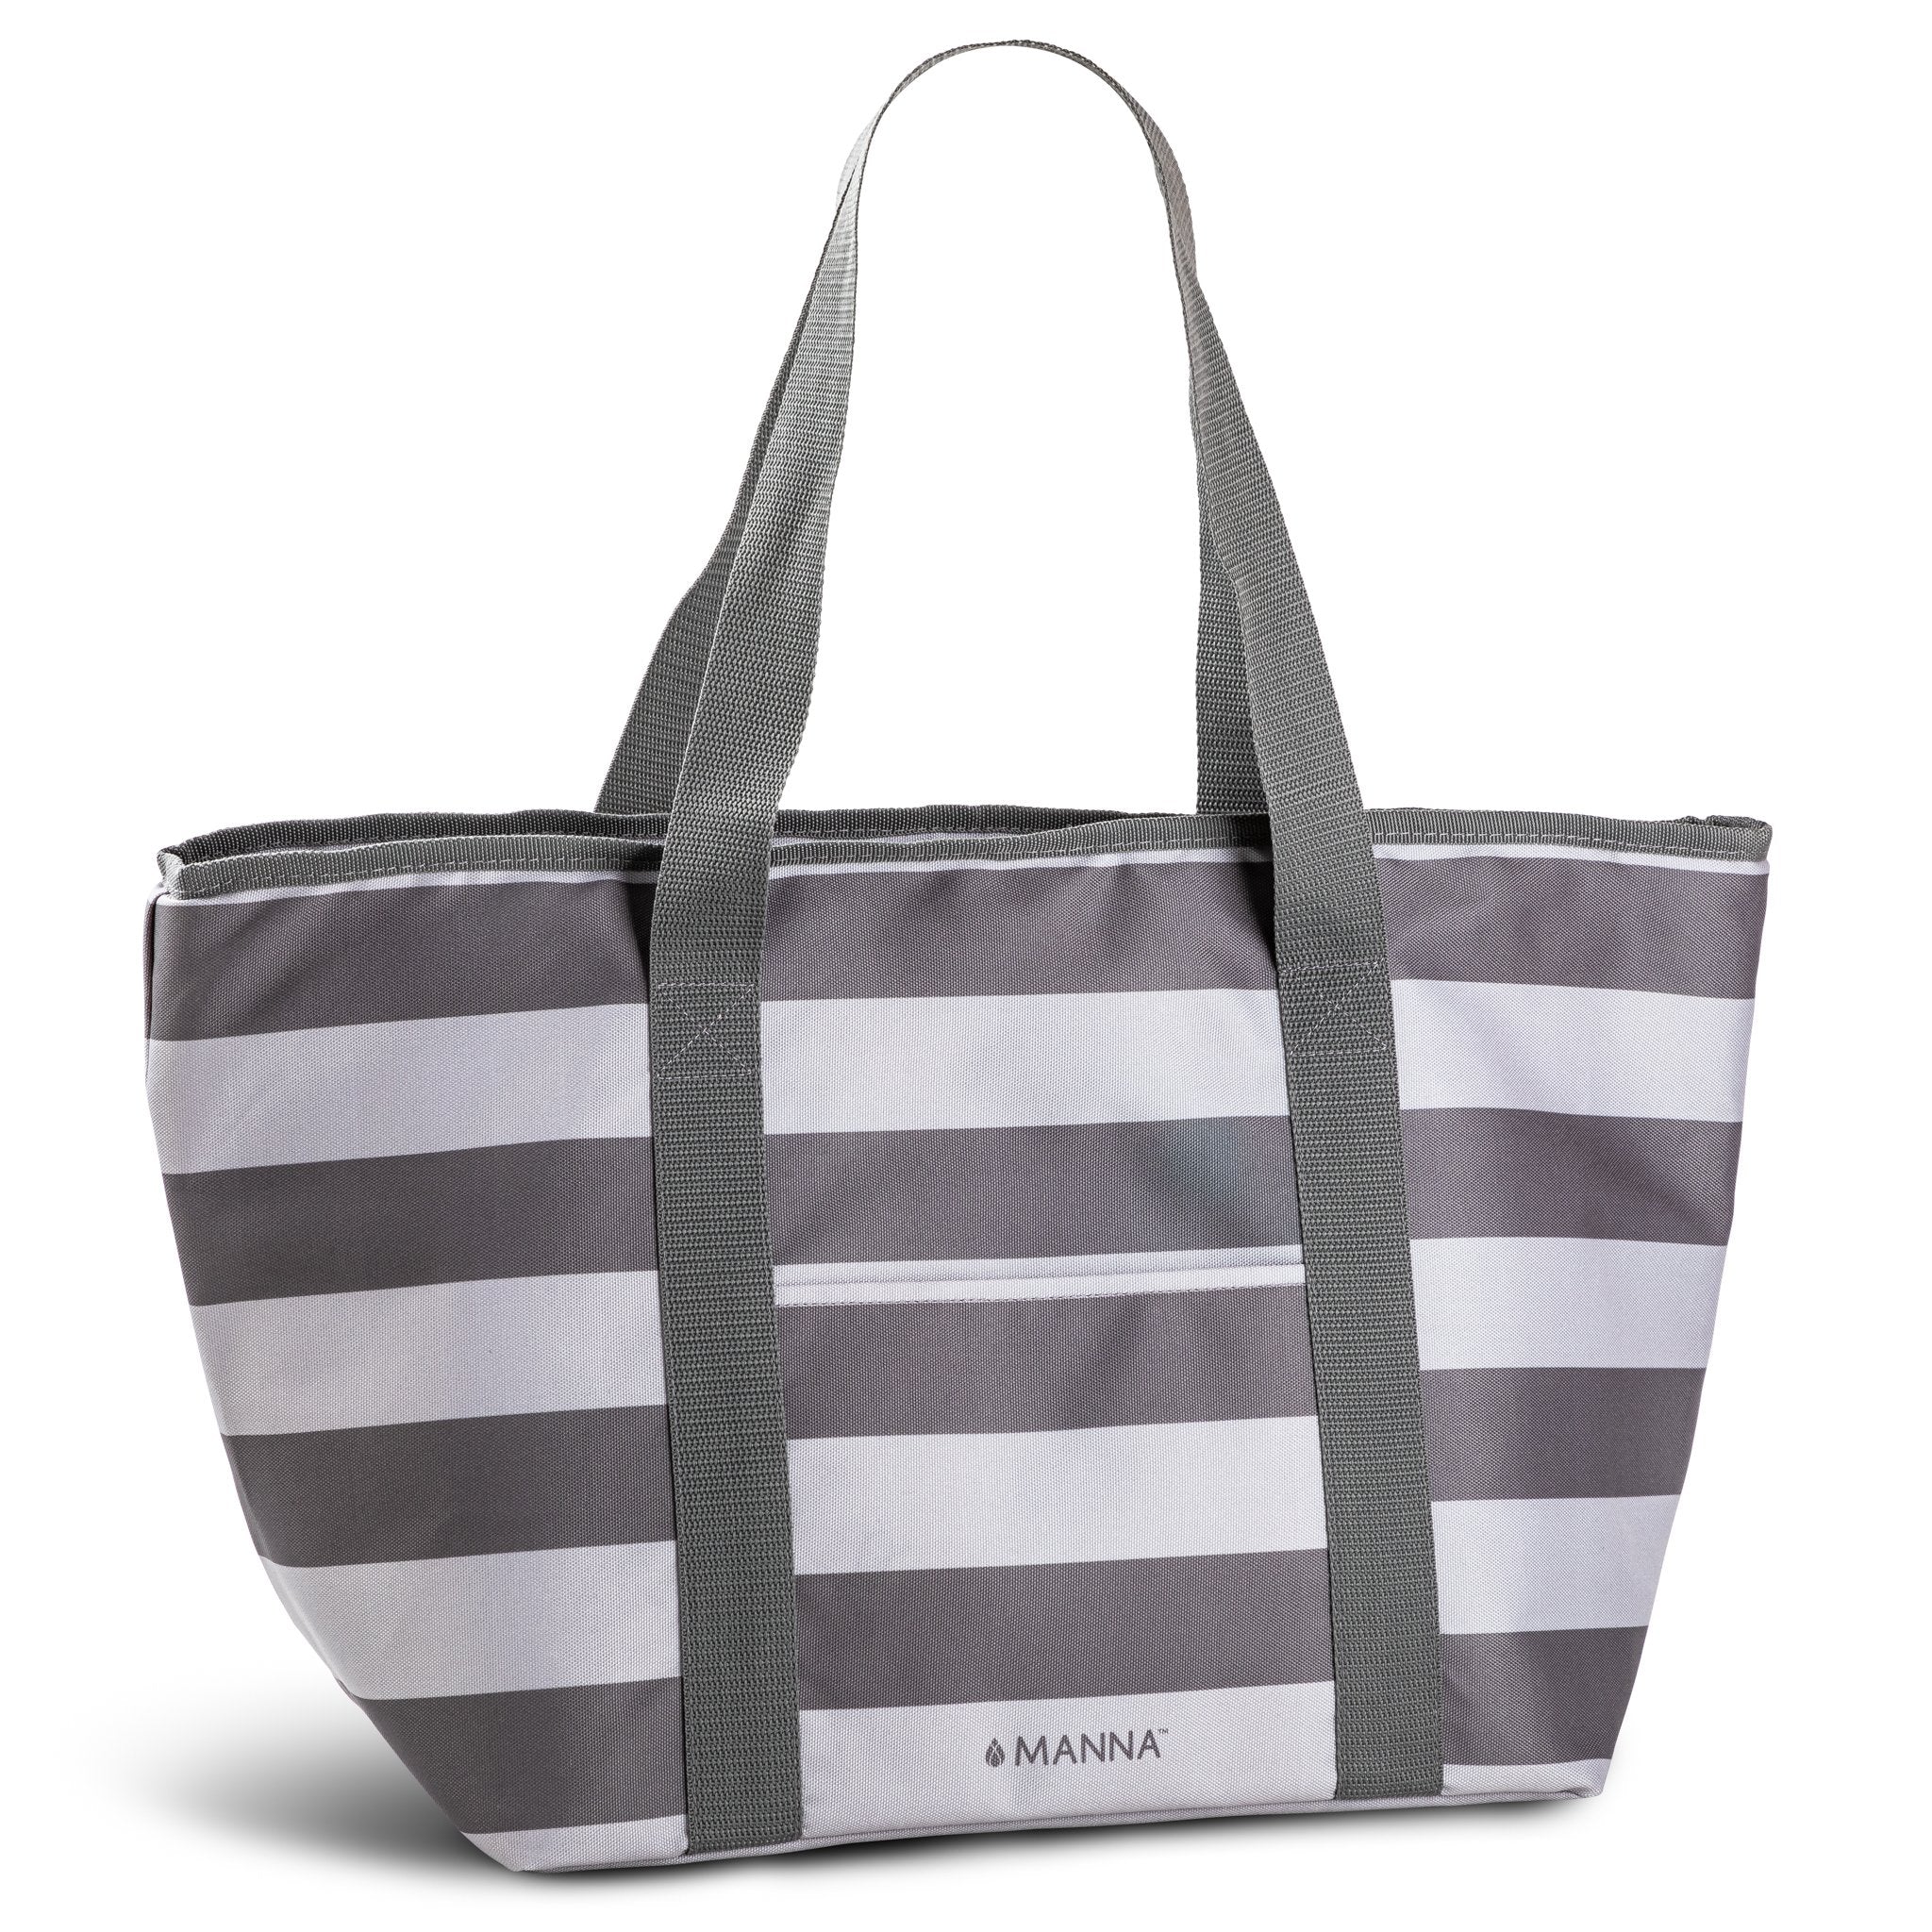 Insulated Tote Bag - Teal/White